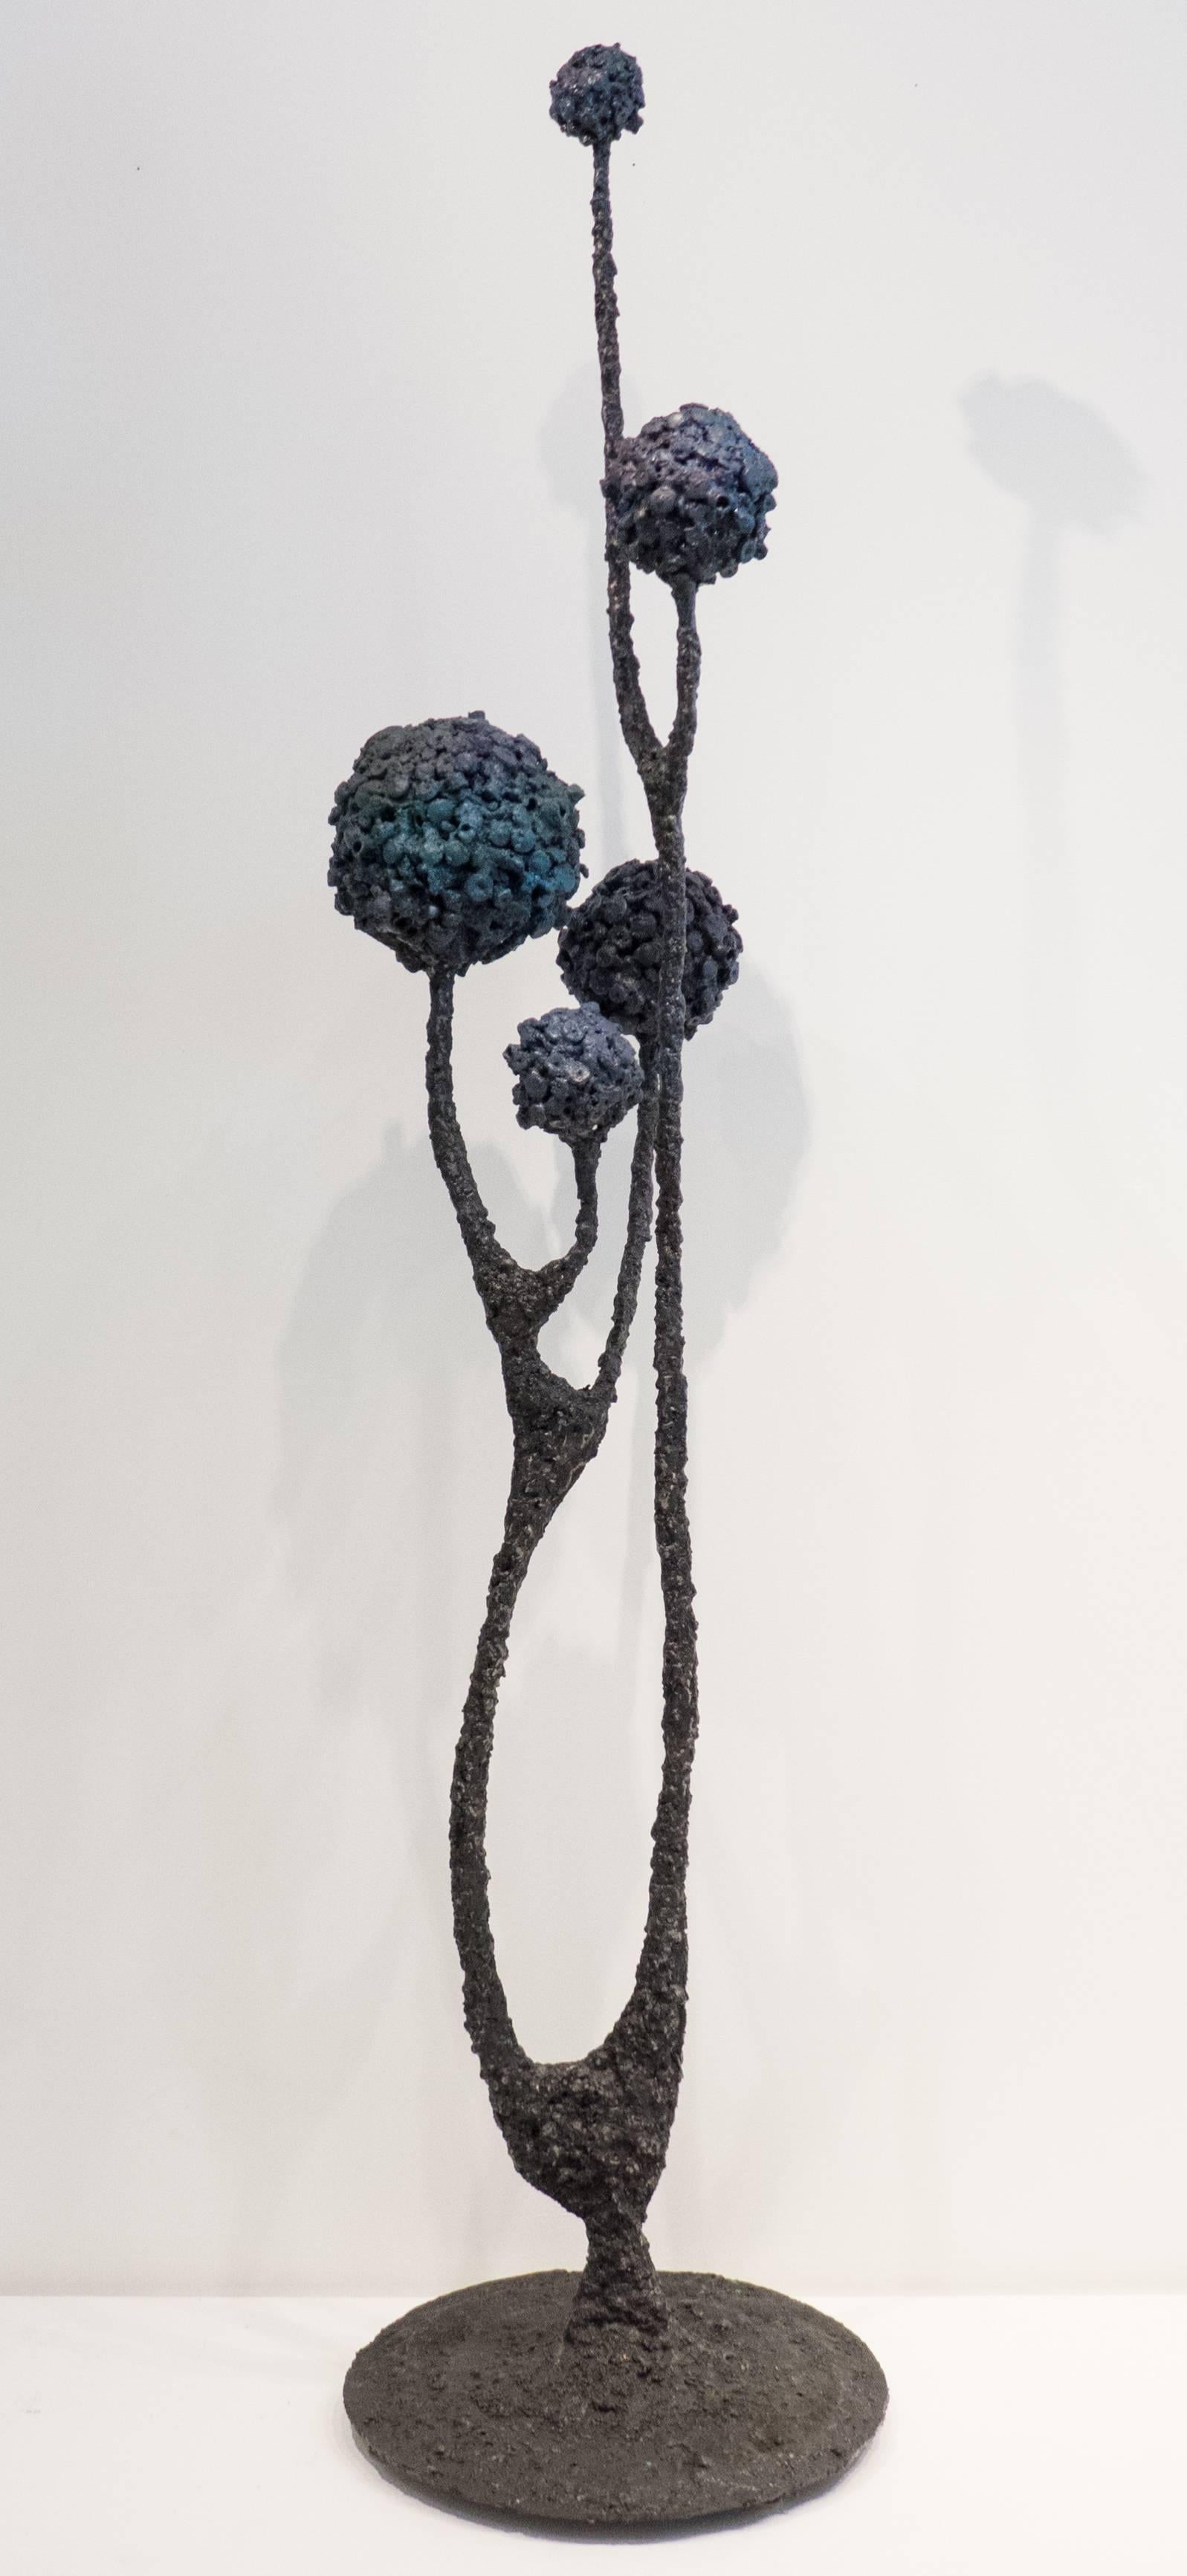 Sinuous botanical abstract sculpture of blackened steel and glass enamel. A Brutalist work by Des Moines, Iowa artist James Bearden, titled "Colony." Bearden's work was featured recently in a solo exhibition at the NY Design Centerin